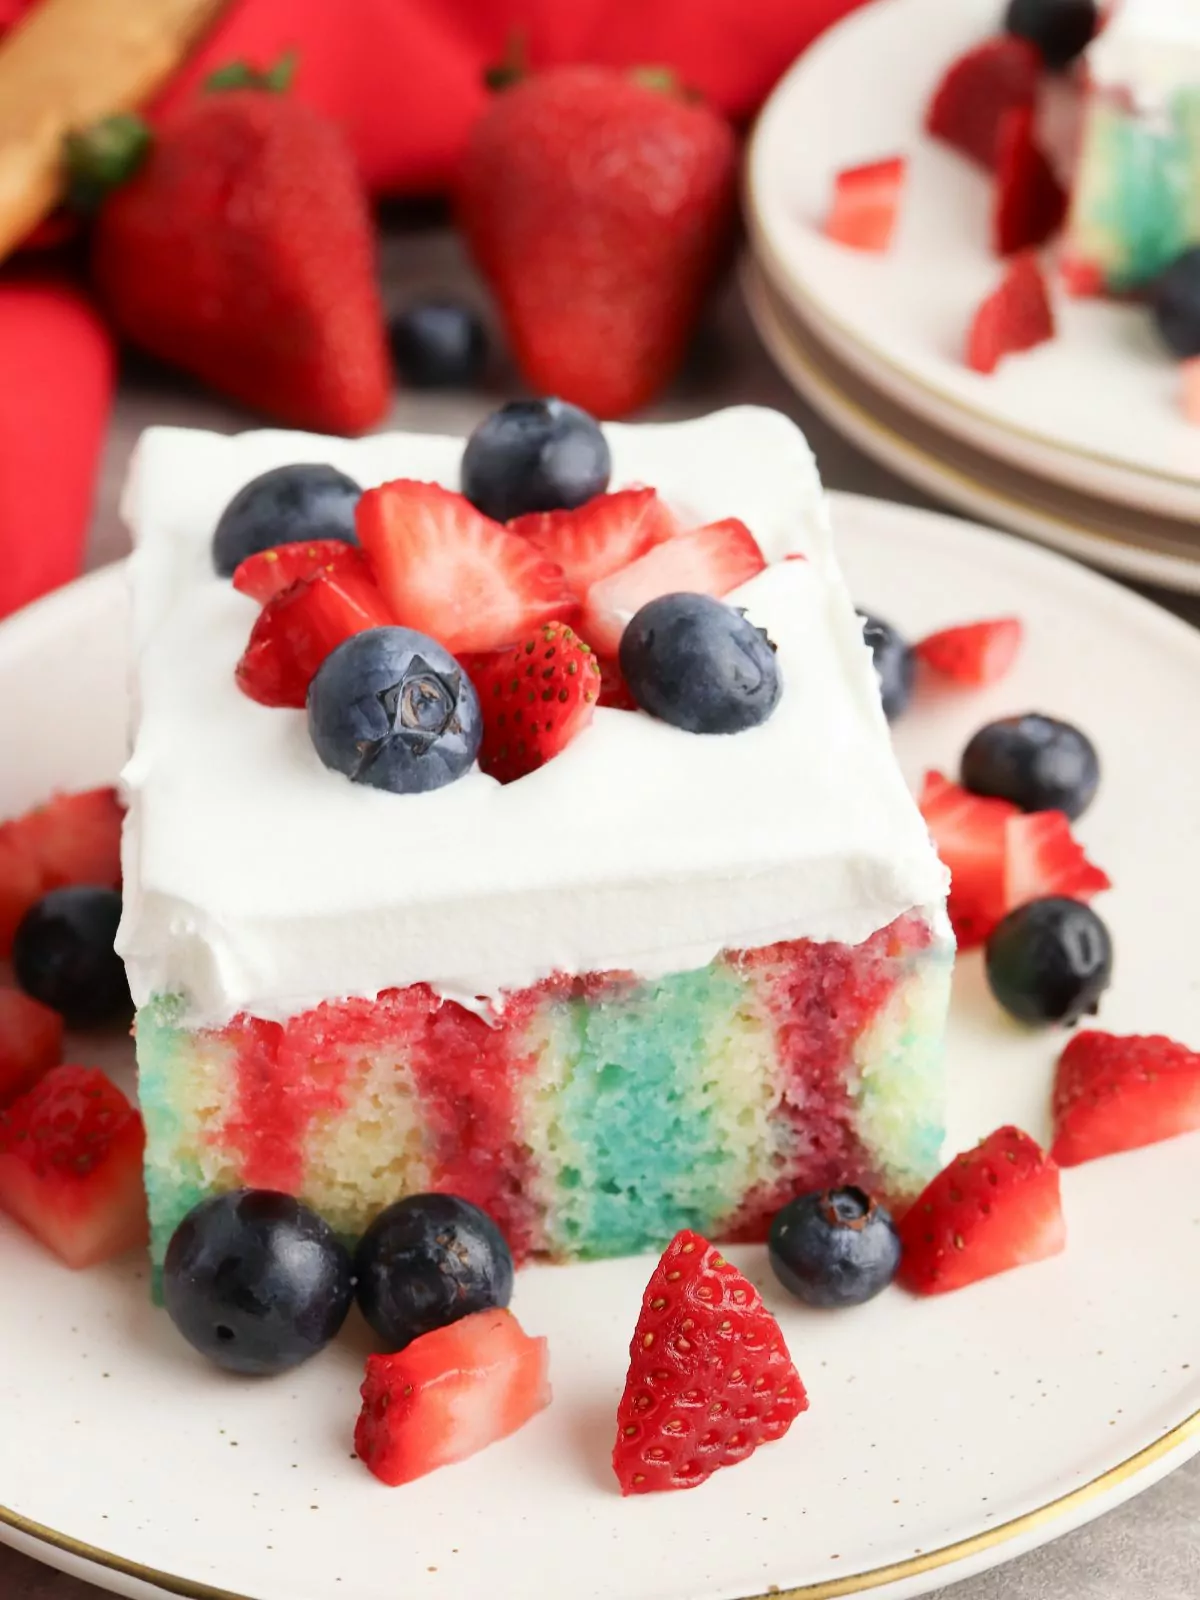 sliced cake for 4th of July on plate.